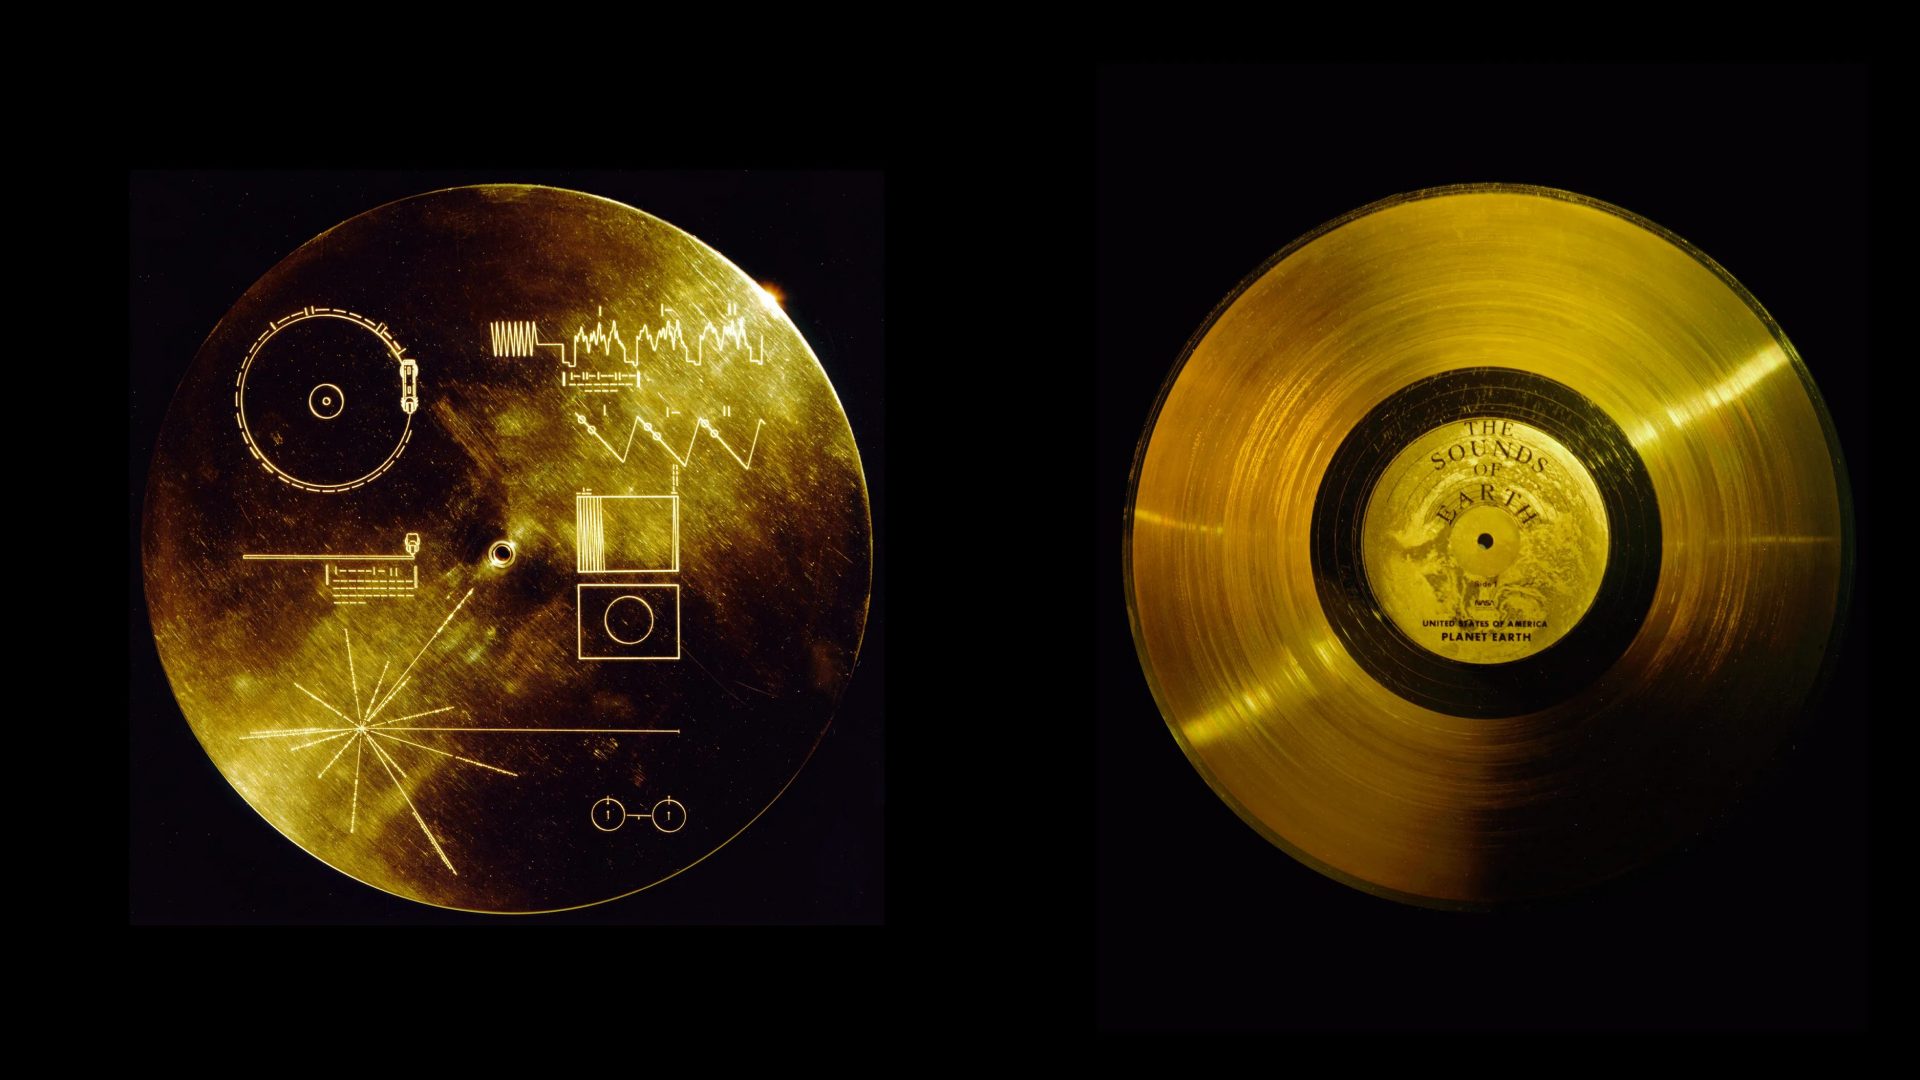 A photograph of both sides of the golden record sent into deep space on board the Voyager probes. One side has grooves with recorded sounds from earth on it. The other side has playback instructions, designed to be understandable by alien civilizations.